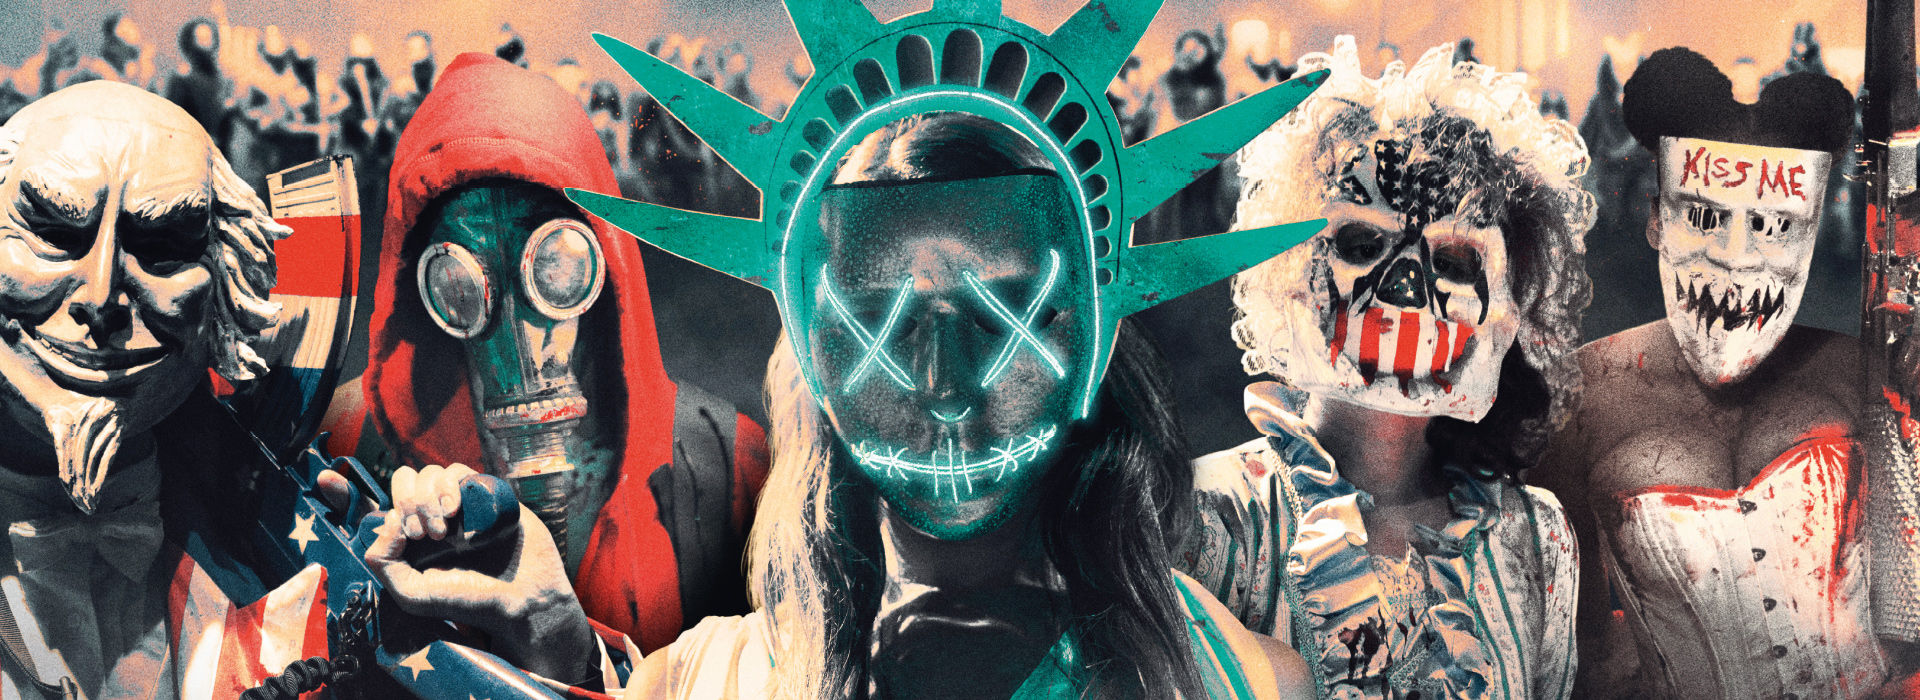 Movie poster The Purge: Election Year